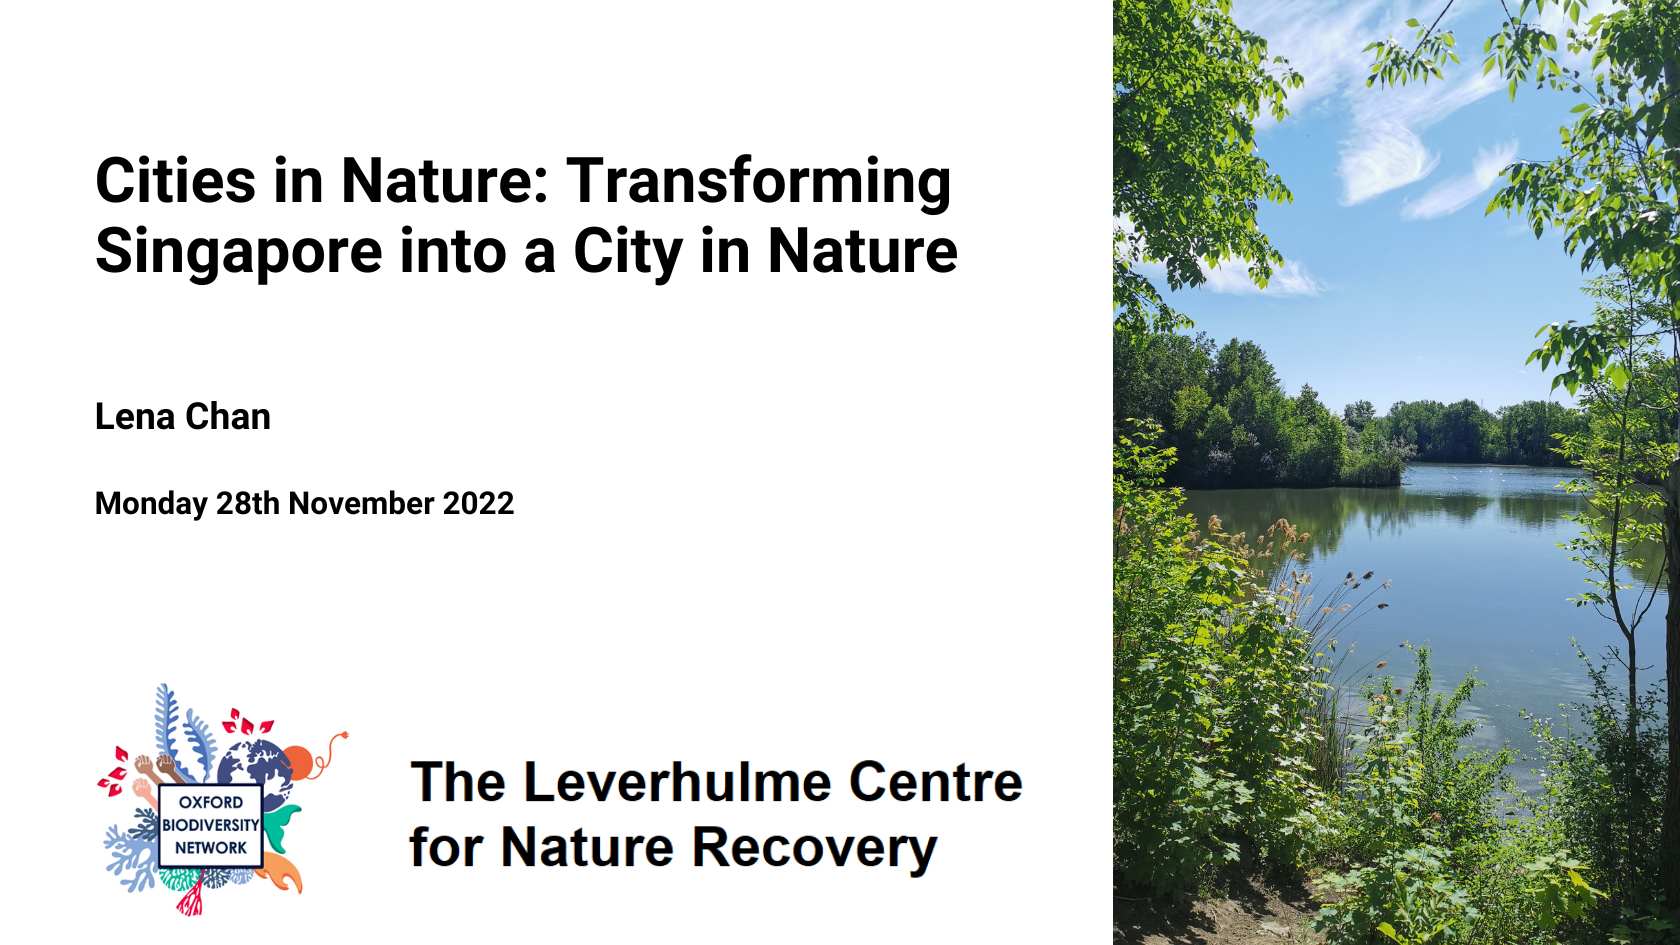 Cities in Nature: Transforming Singapore into a City in Nature